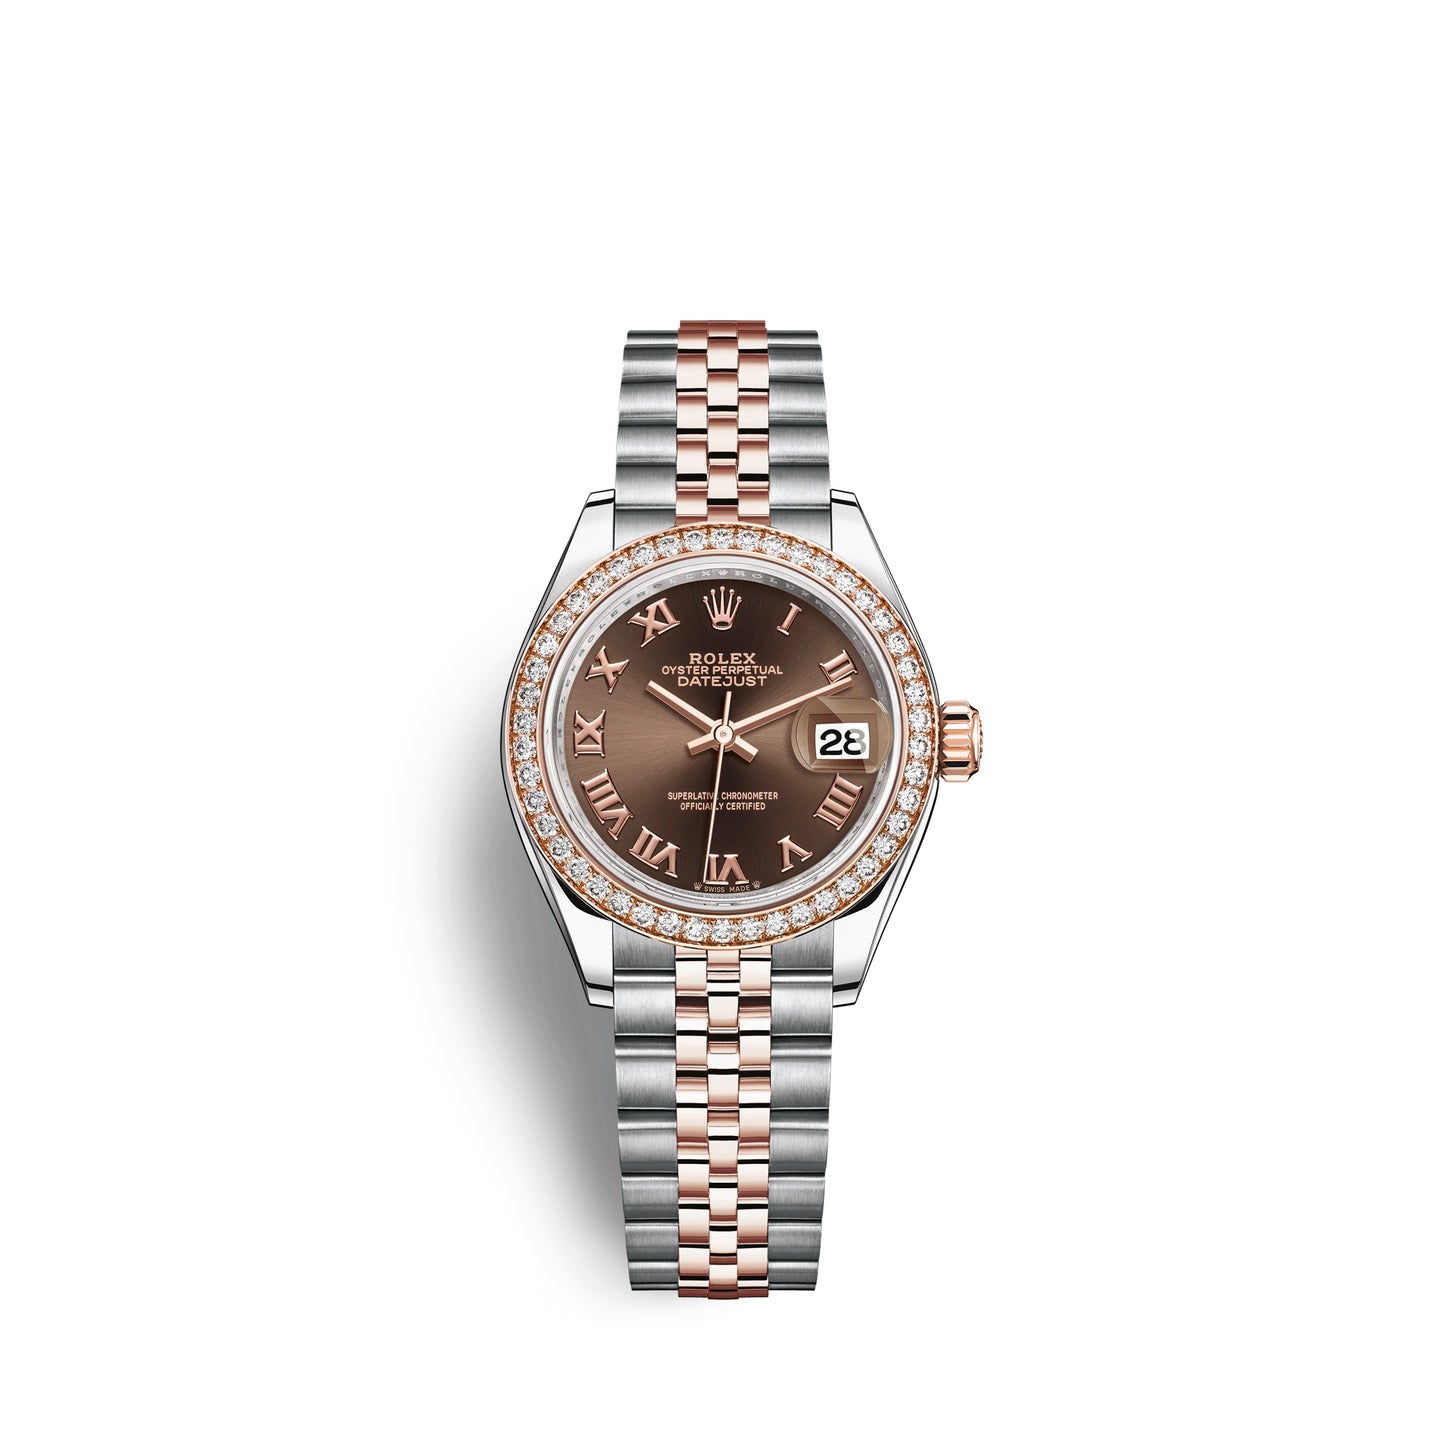 Rolex Lady-Datejust 28, Oystersteel and 18k Everose Gold, Ref# 279381RBR-0009